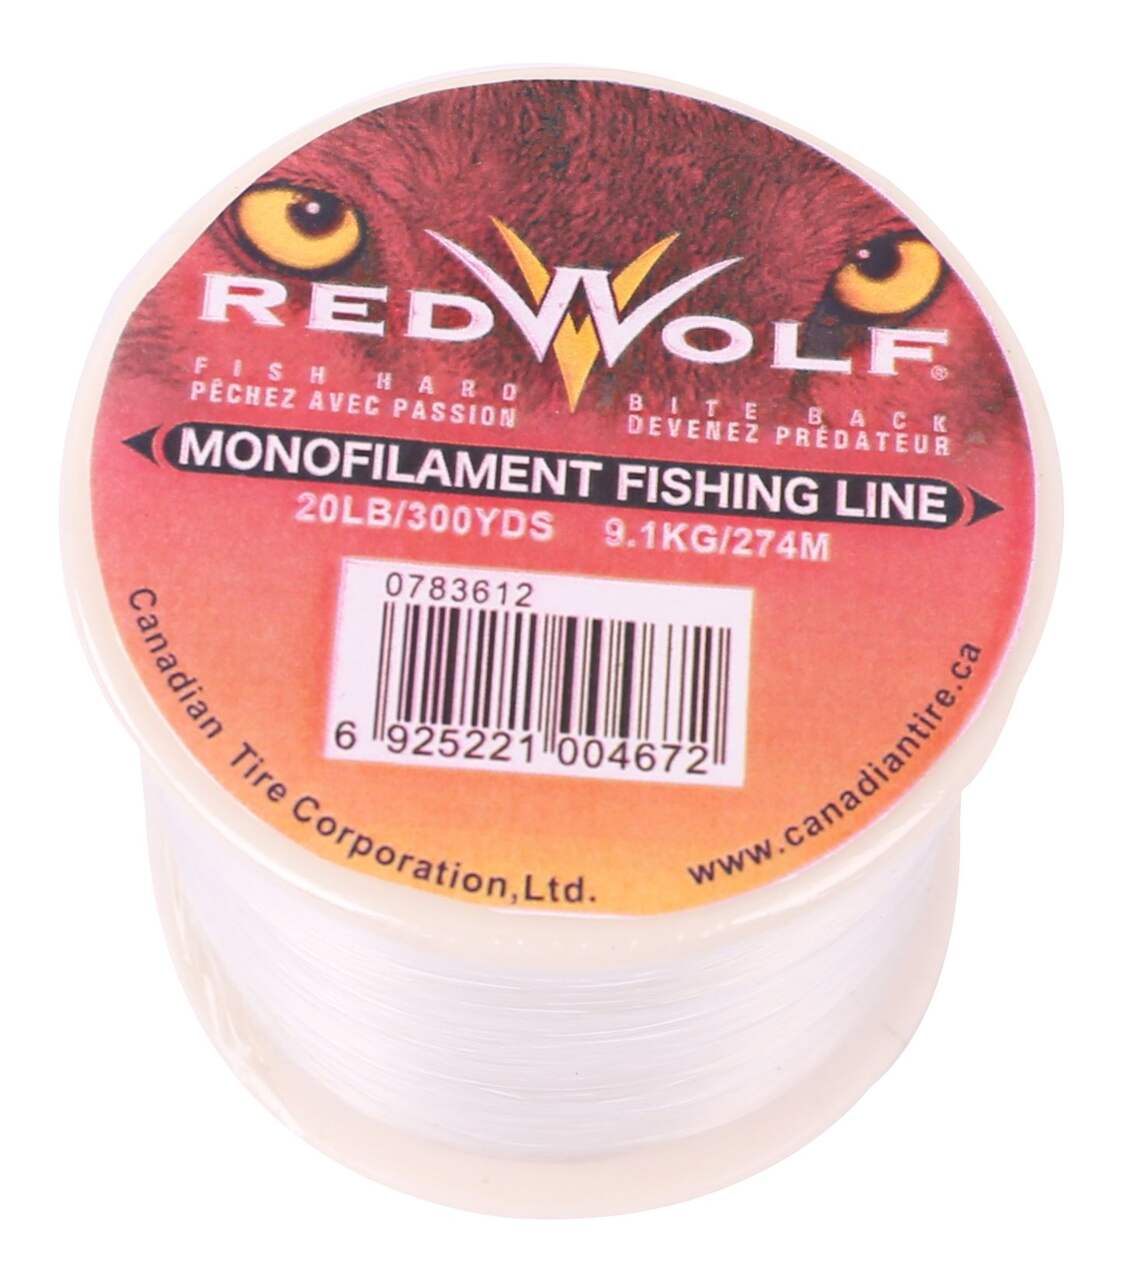 Monofilament Fishing Lines & Pink 2 lb Line Weight Fishing Leaders for sale